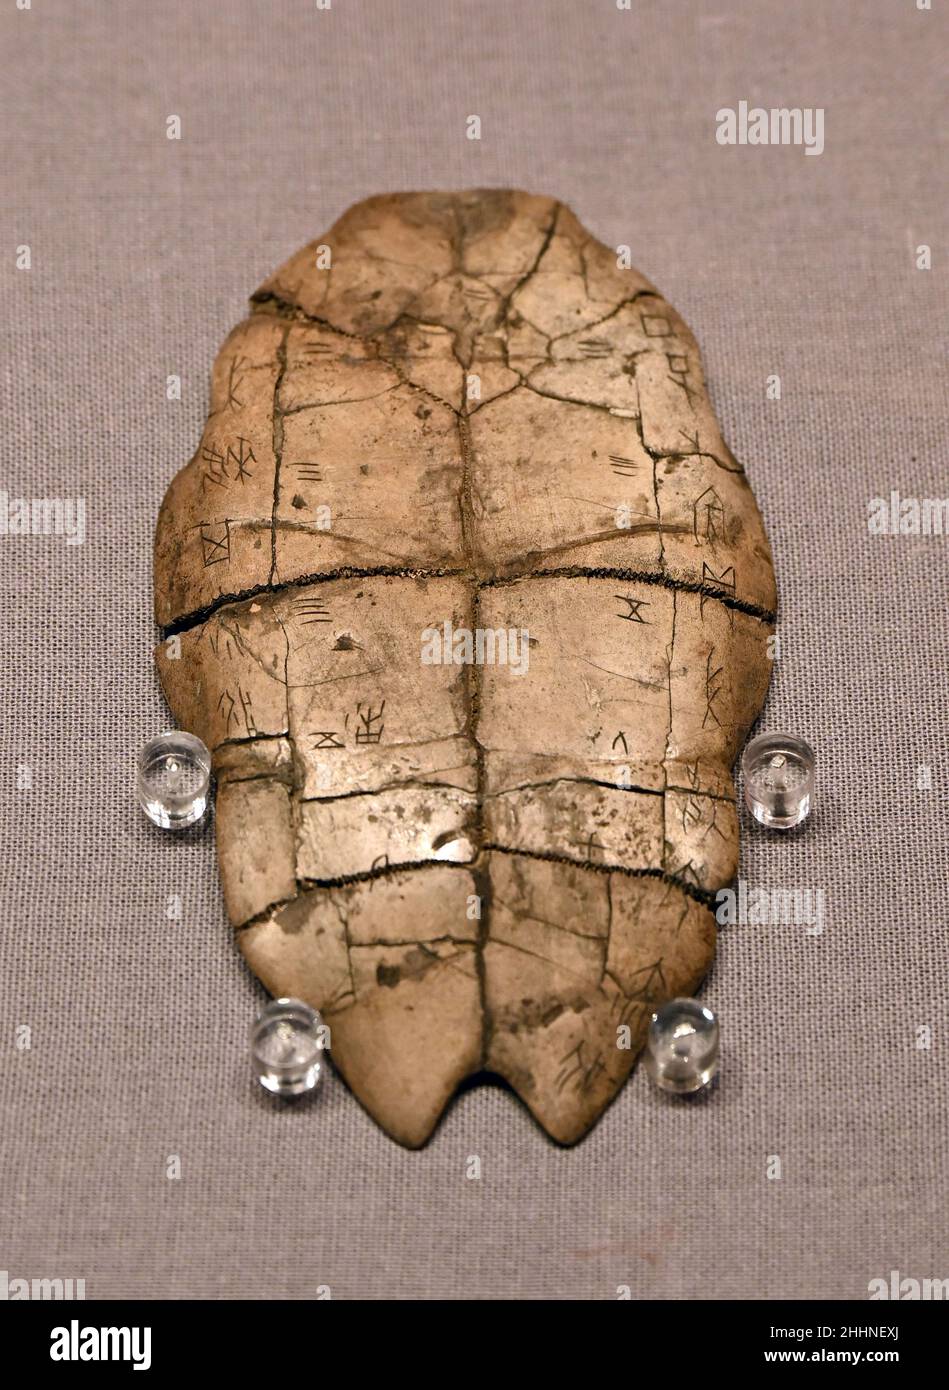 (220125) -- BEIJING, Jan. 25, 2022 (Xinhua) -- Photo taken on Jan. 25, 2022 shows a piece of tortoise shell carrying inscriptions during an exhibition held at the Palace Museum in Beijing, capital of China. The exhibition featuring Chinese civilization opened Tuesday at the Palace Museum, also known as the Forbidden City. With more than 130 pieces or sets of precious cultural relics displayed, the exhibition sheds light on the origin, development and achievements of Chinese civilization, as well as its major contributions to human civilization. The exhibition will run until May 4. Advance Stock Photo